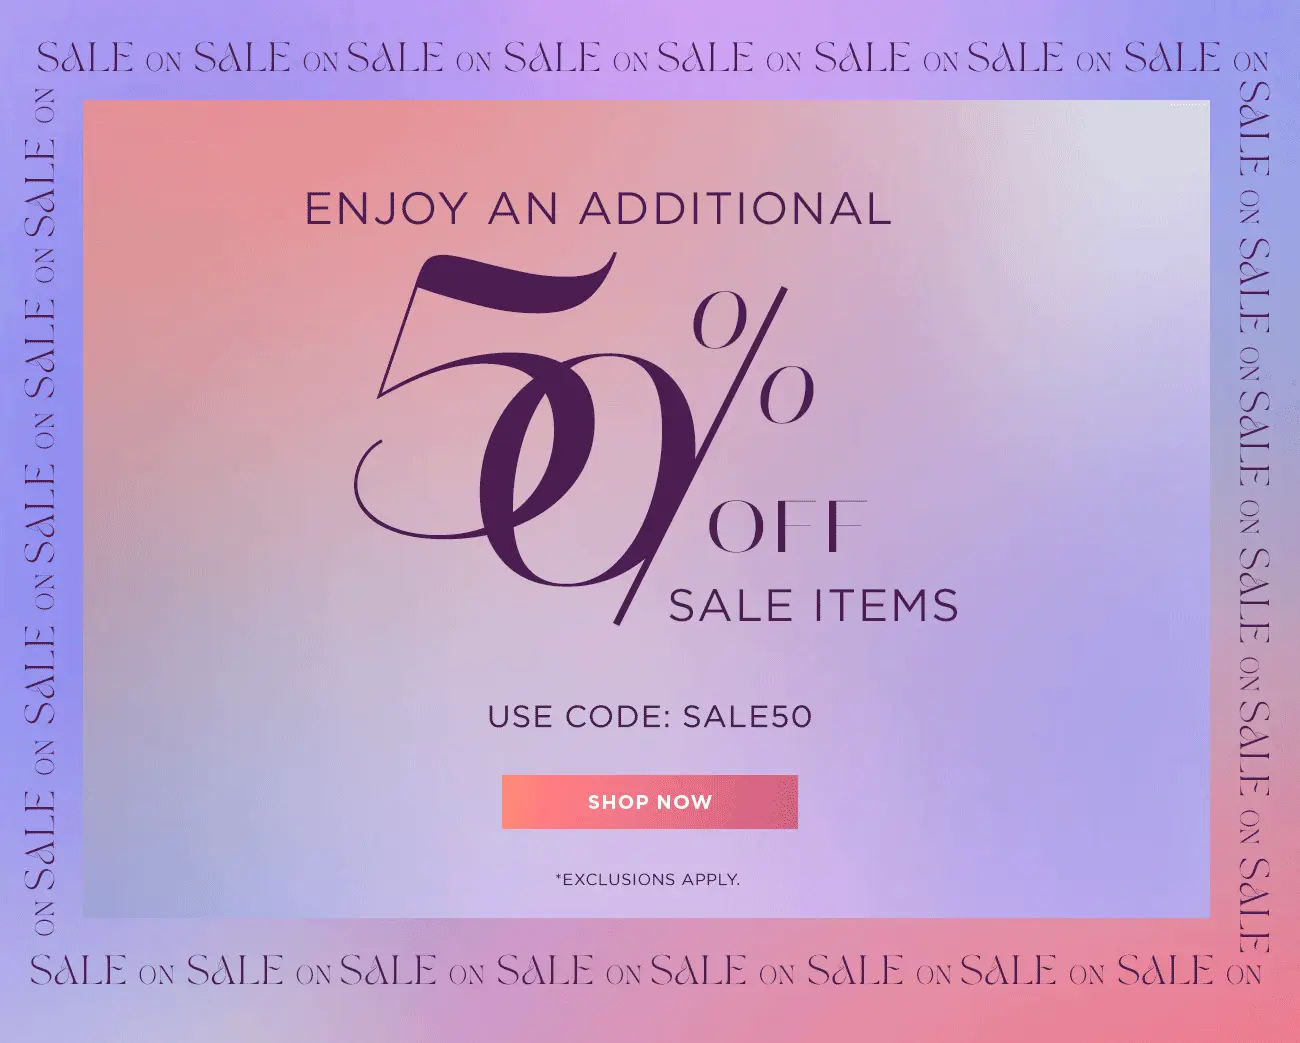 Enjoy an Additional 50% Off Sale Items | Shop Now